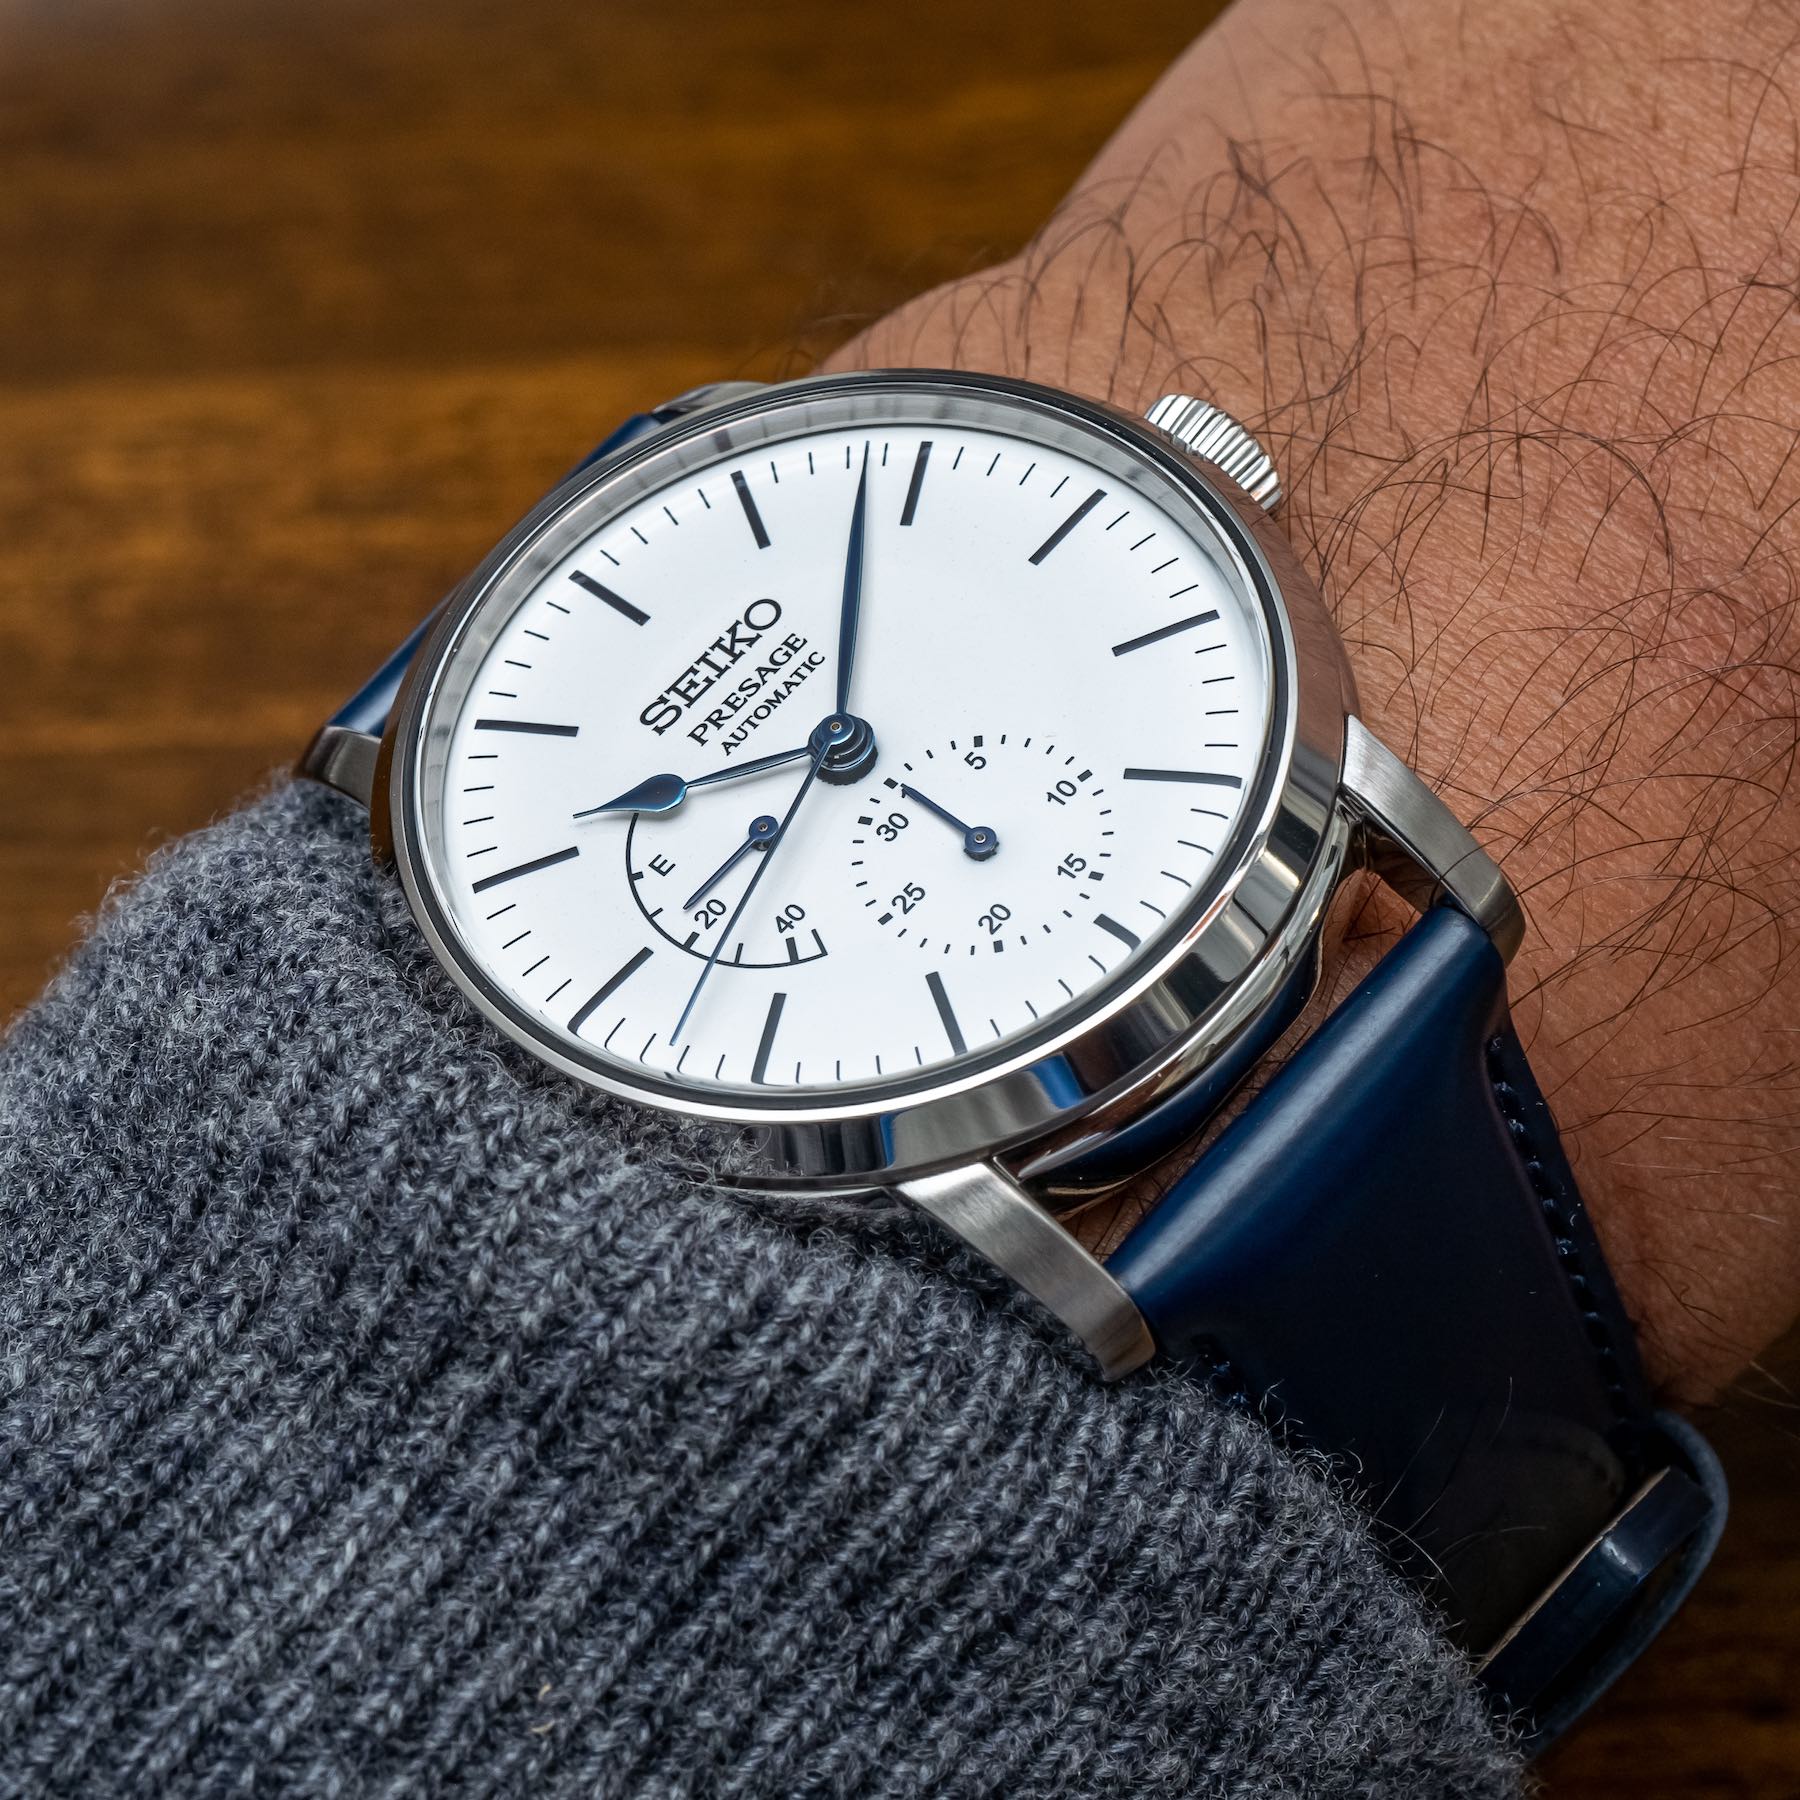 Hands-On Debut: Seiko Presage Enamel & Porcelain Dial Watches For 2020 | aBlogtoWatch